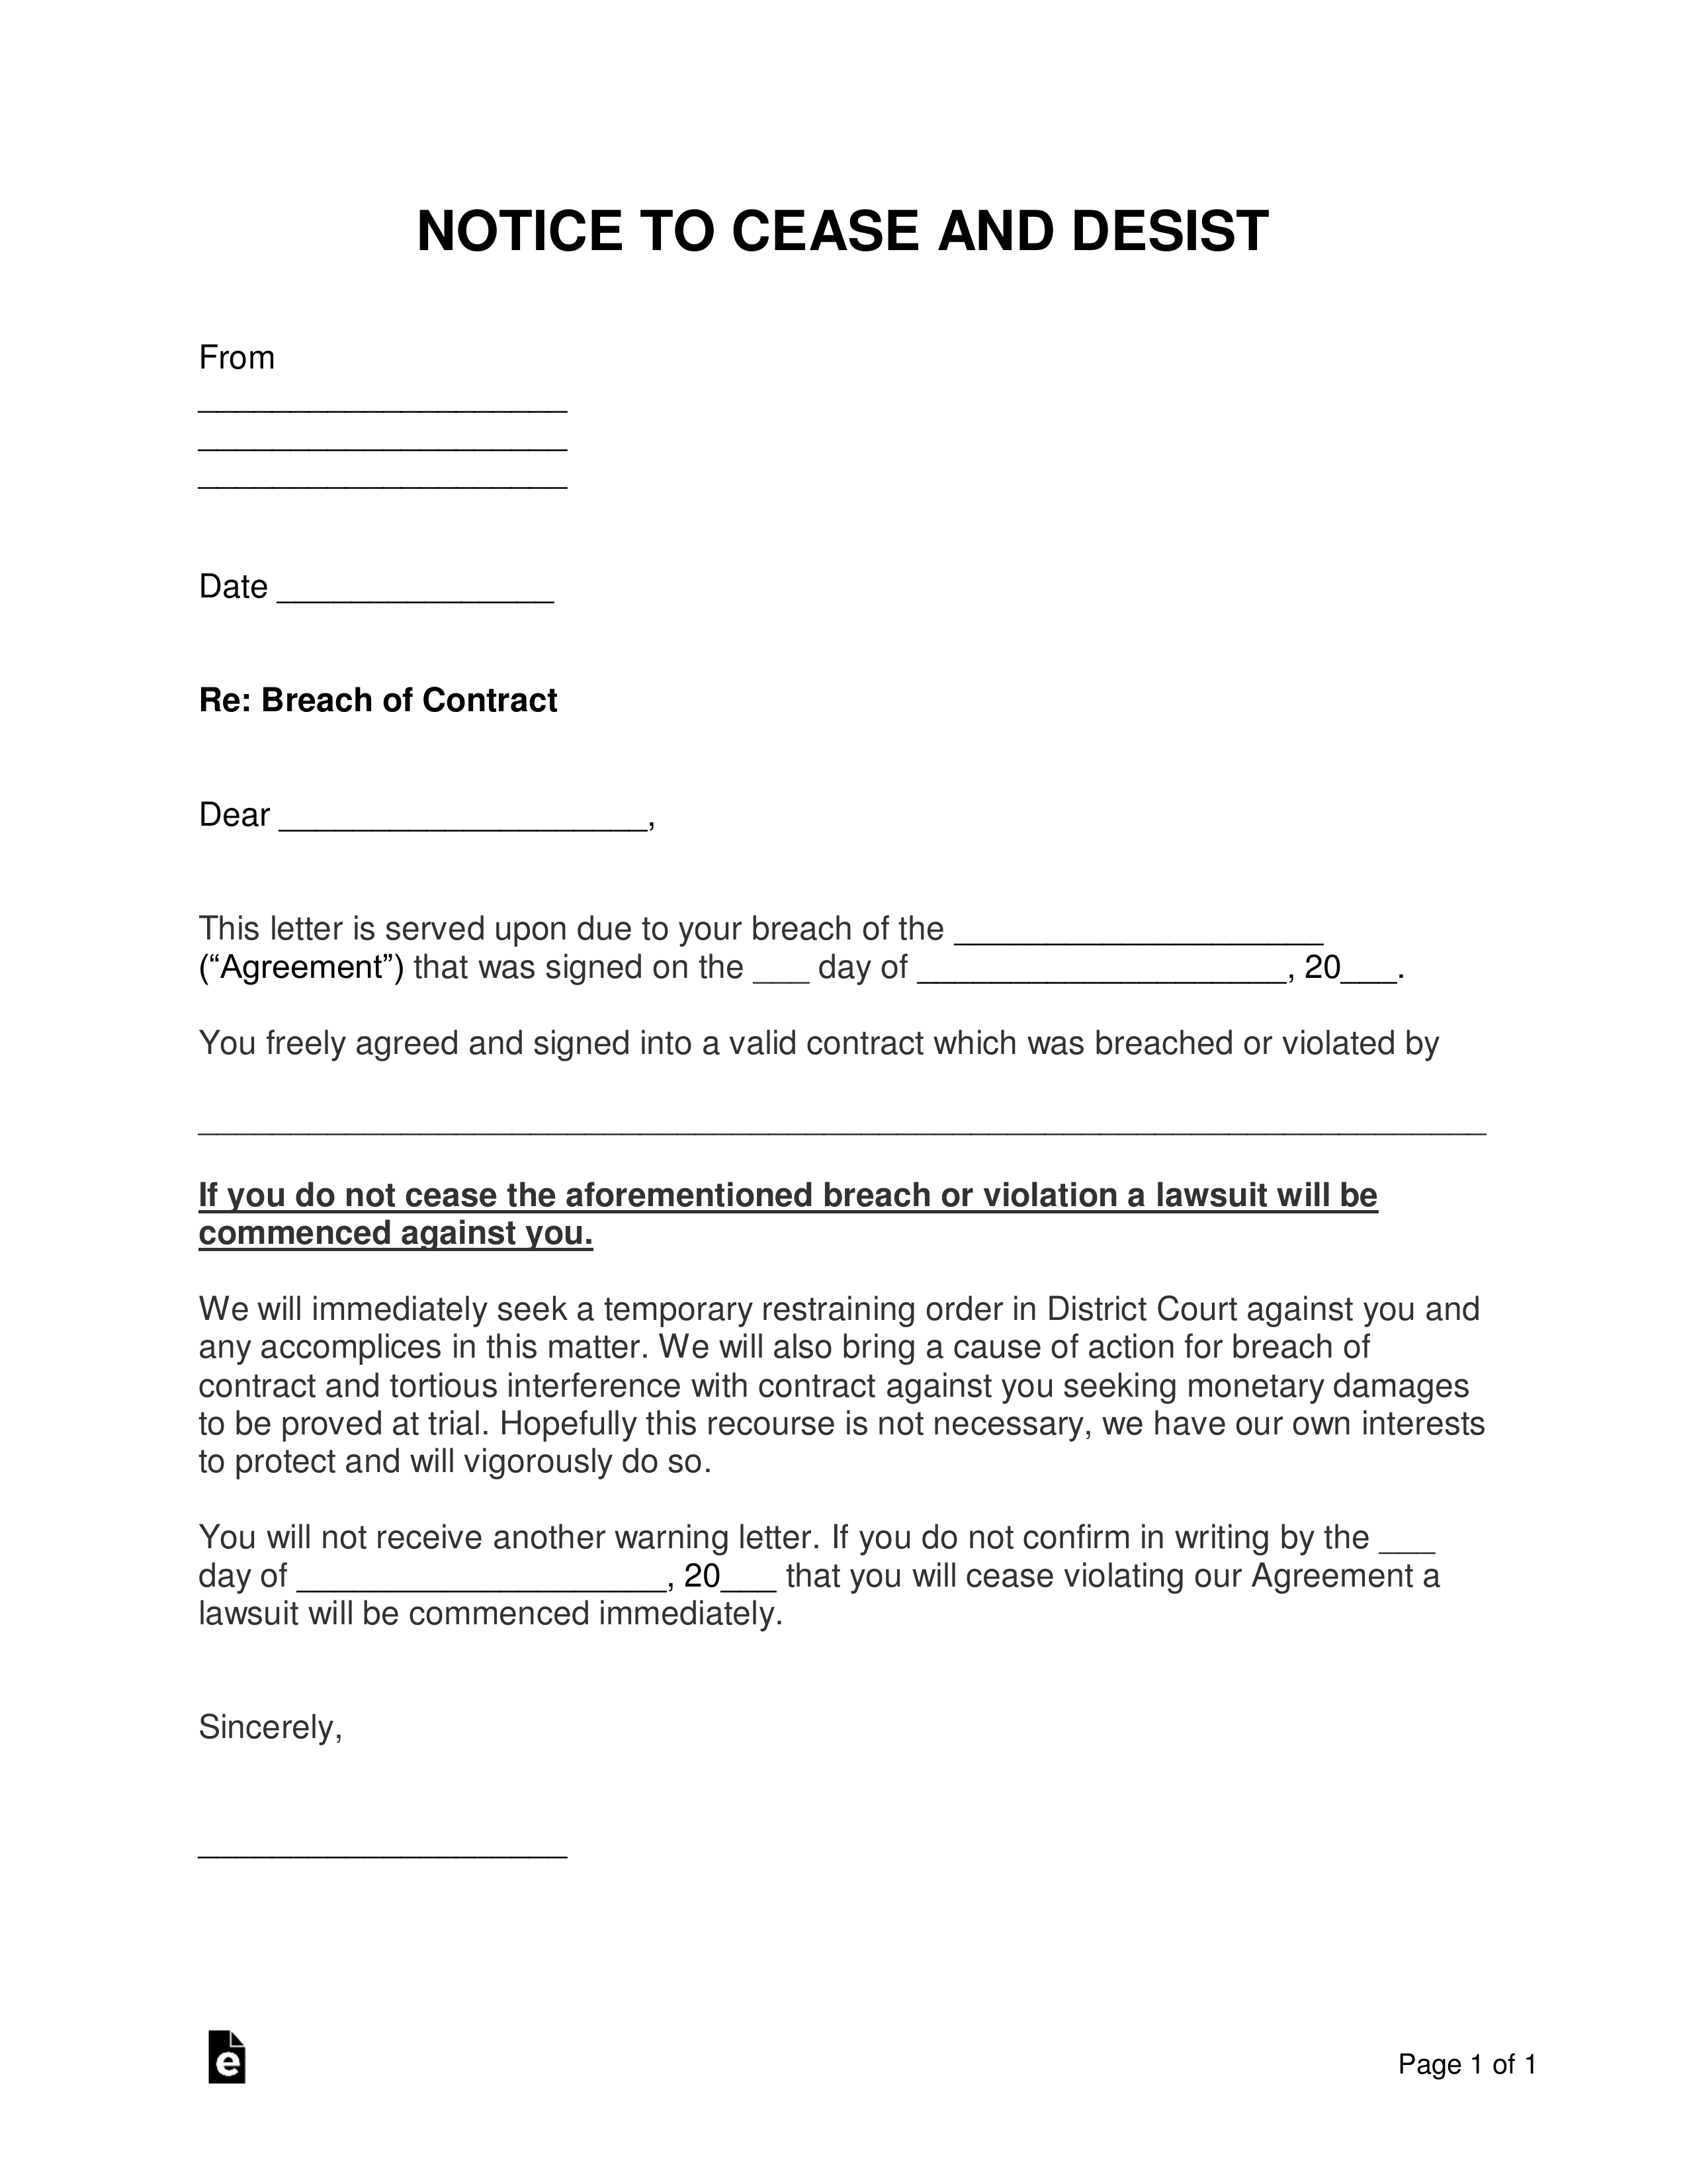 Anticipatory Breach Of Contract Letter from eforms.com